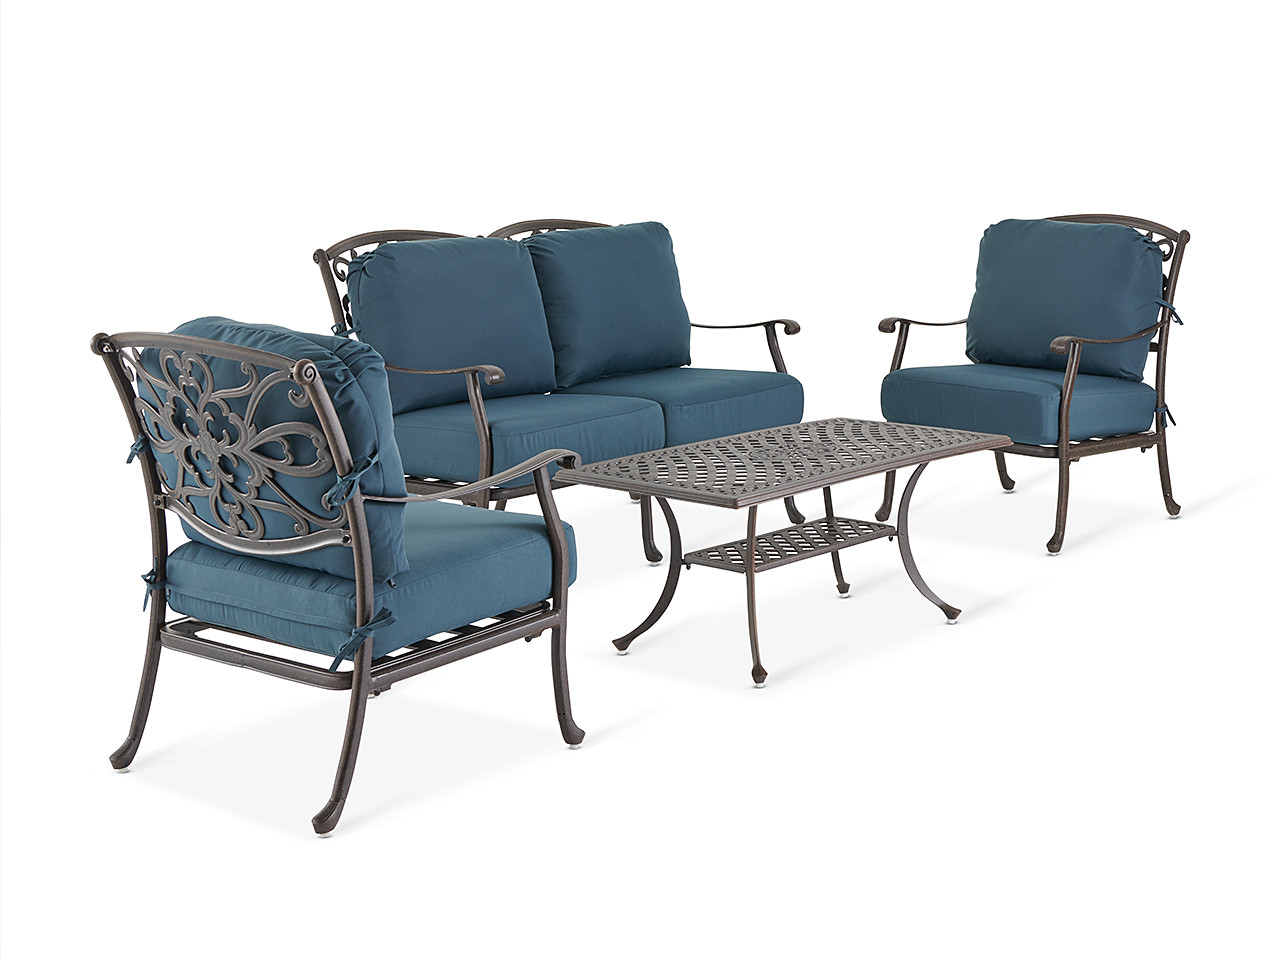 Carlisle Aged Bronze Cast Aluminum and Navy Cushion 4 Pc. Loveseat Group with 45 x 24 in. Coffee Table